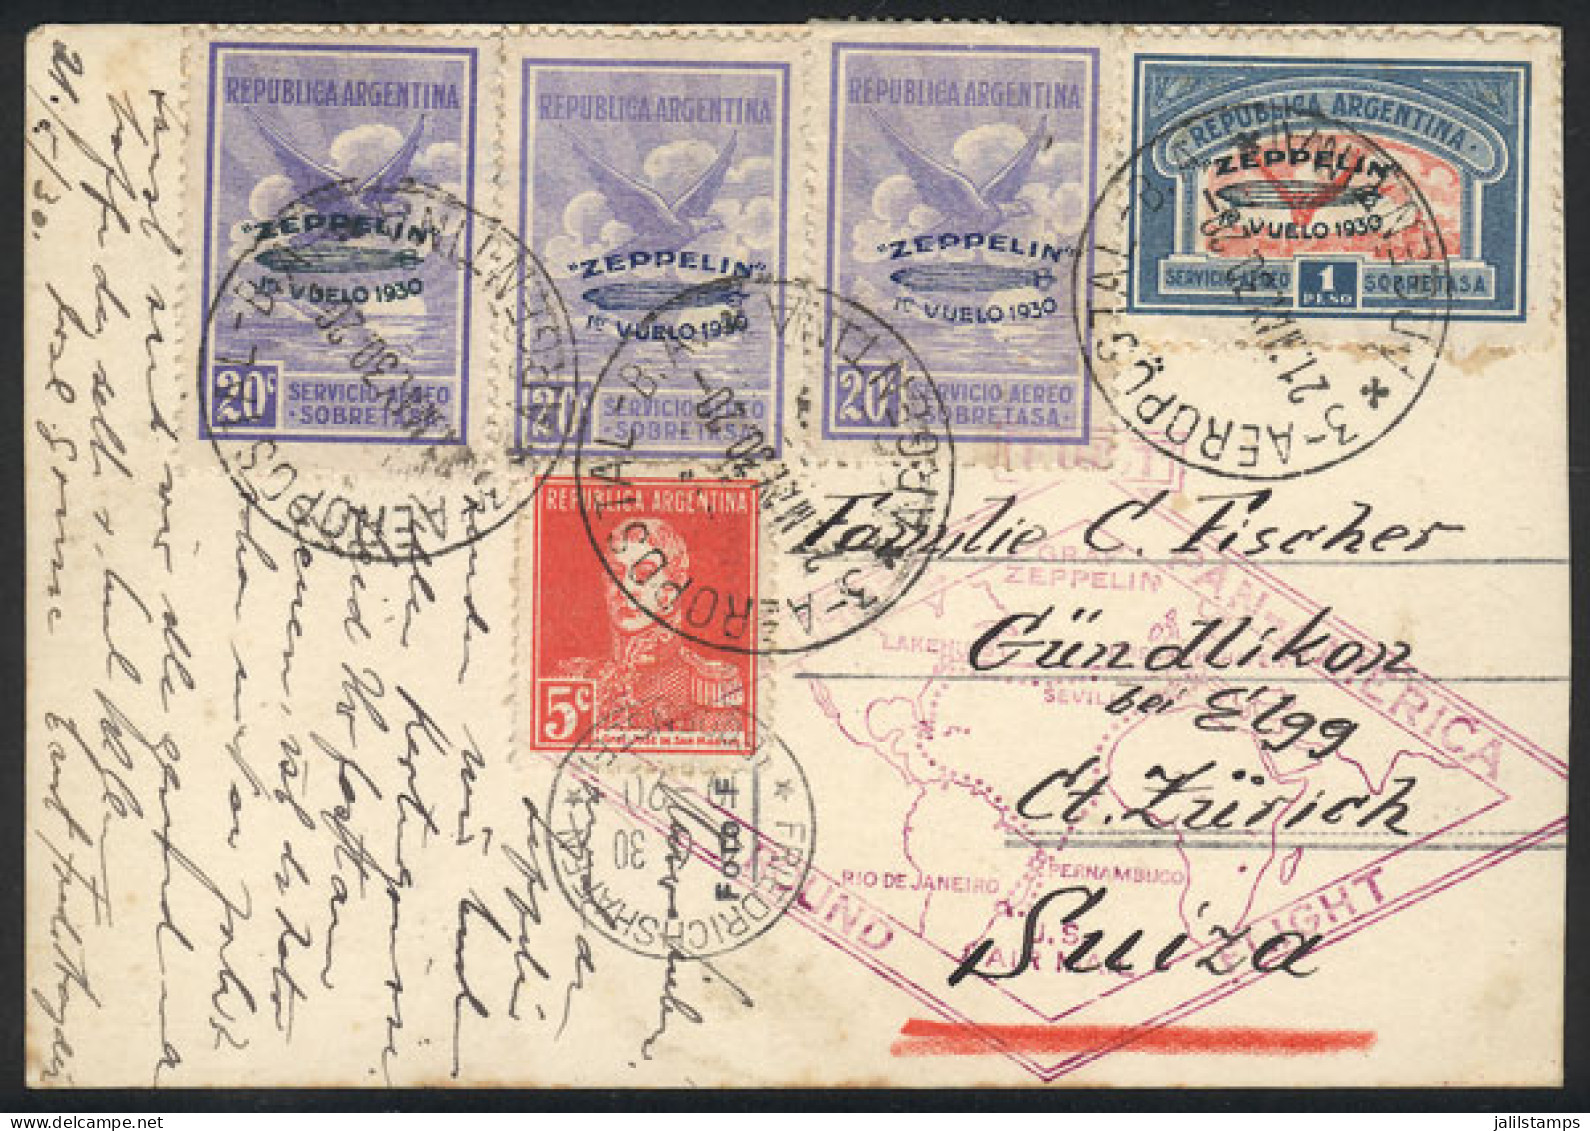 BRAZIL TO URUGUAY, AIR MAIL COVER, 1933, AEROPOSTALE W/CINDERELLA ON THE  BACK